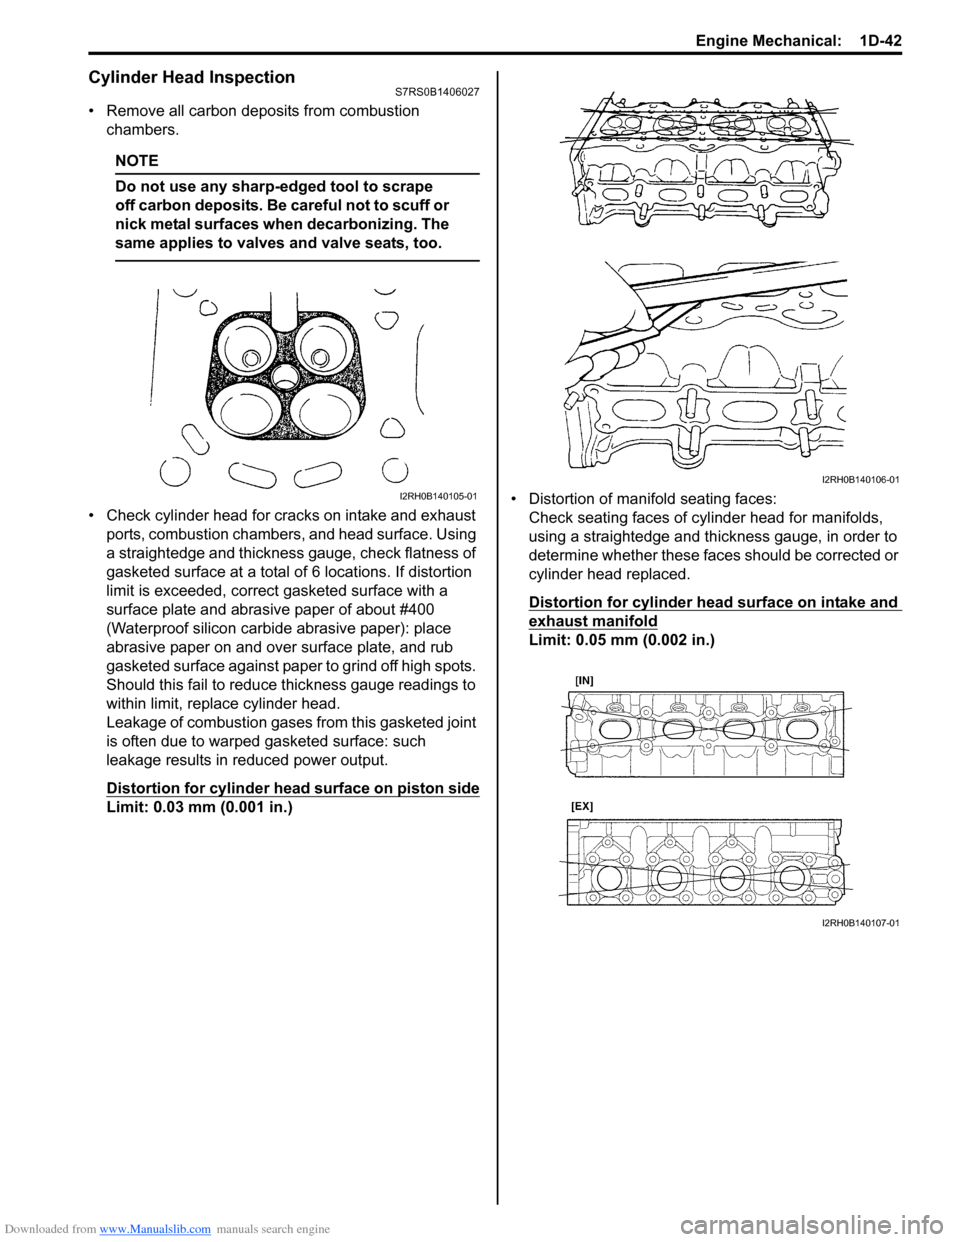 SUZUKI SWIFT 2007 2.G Service Workshop Manual Downloaded from www.Manualslib.com manuals search engine Engine Mechanical:  1D-42
Cylinder Head InspectionS7RS0B1406027
• Remove all carbon deposits from combustion chambers.
NOTE
Do not use any sh